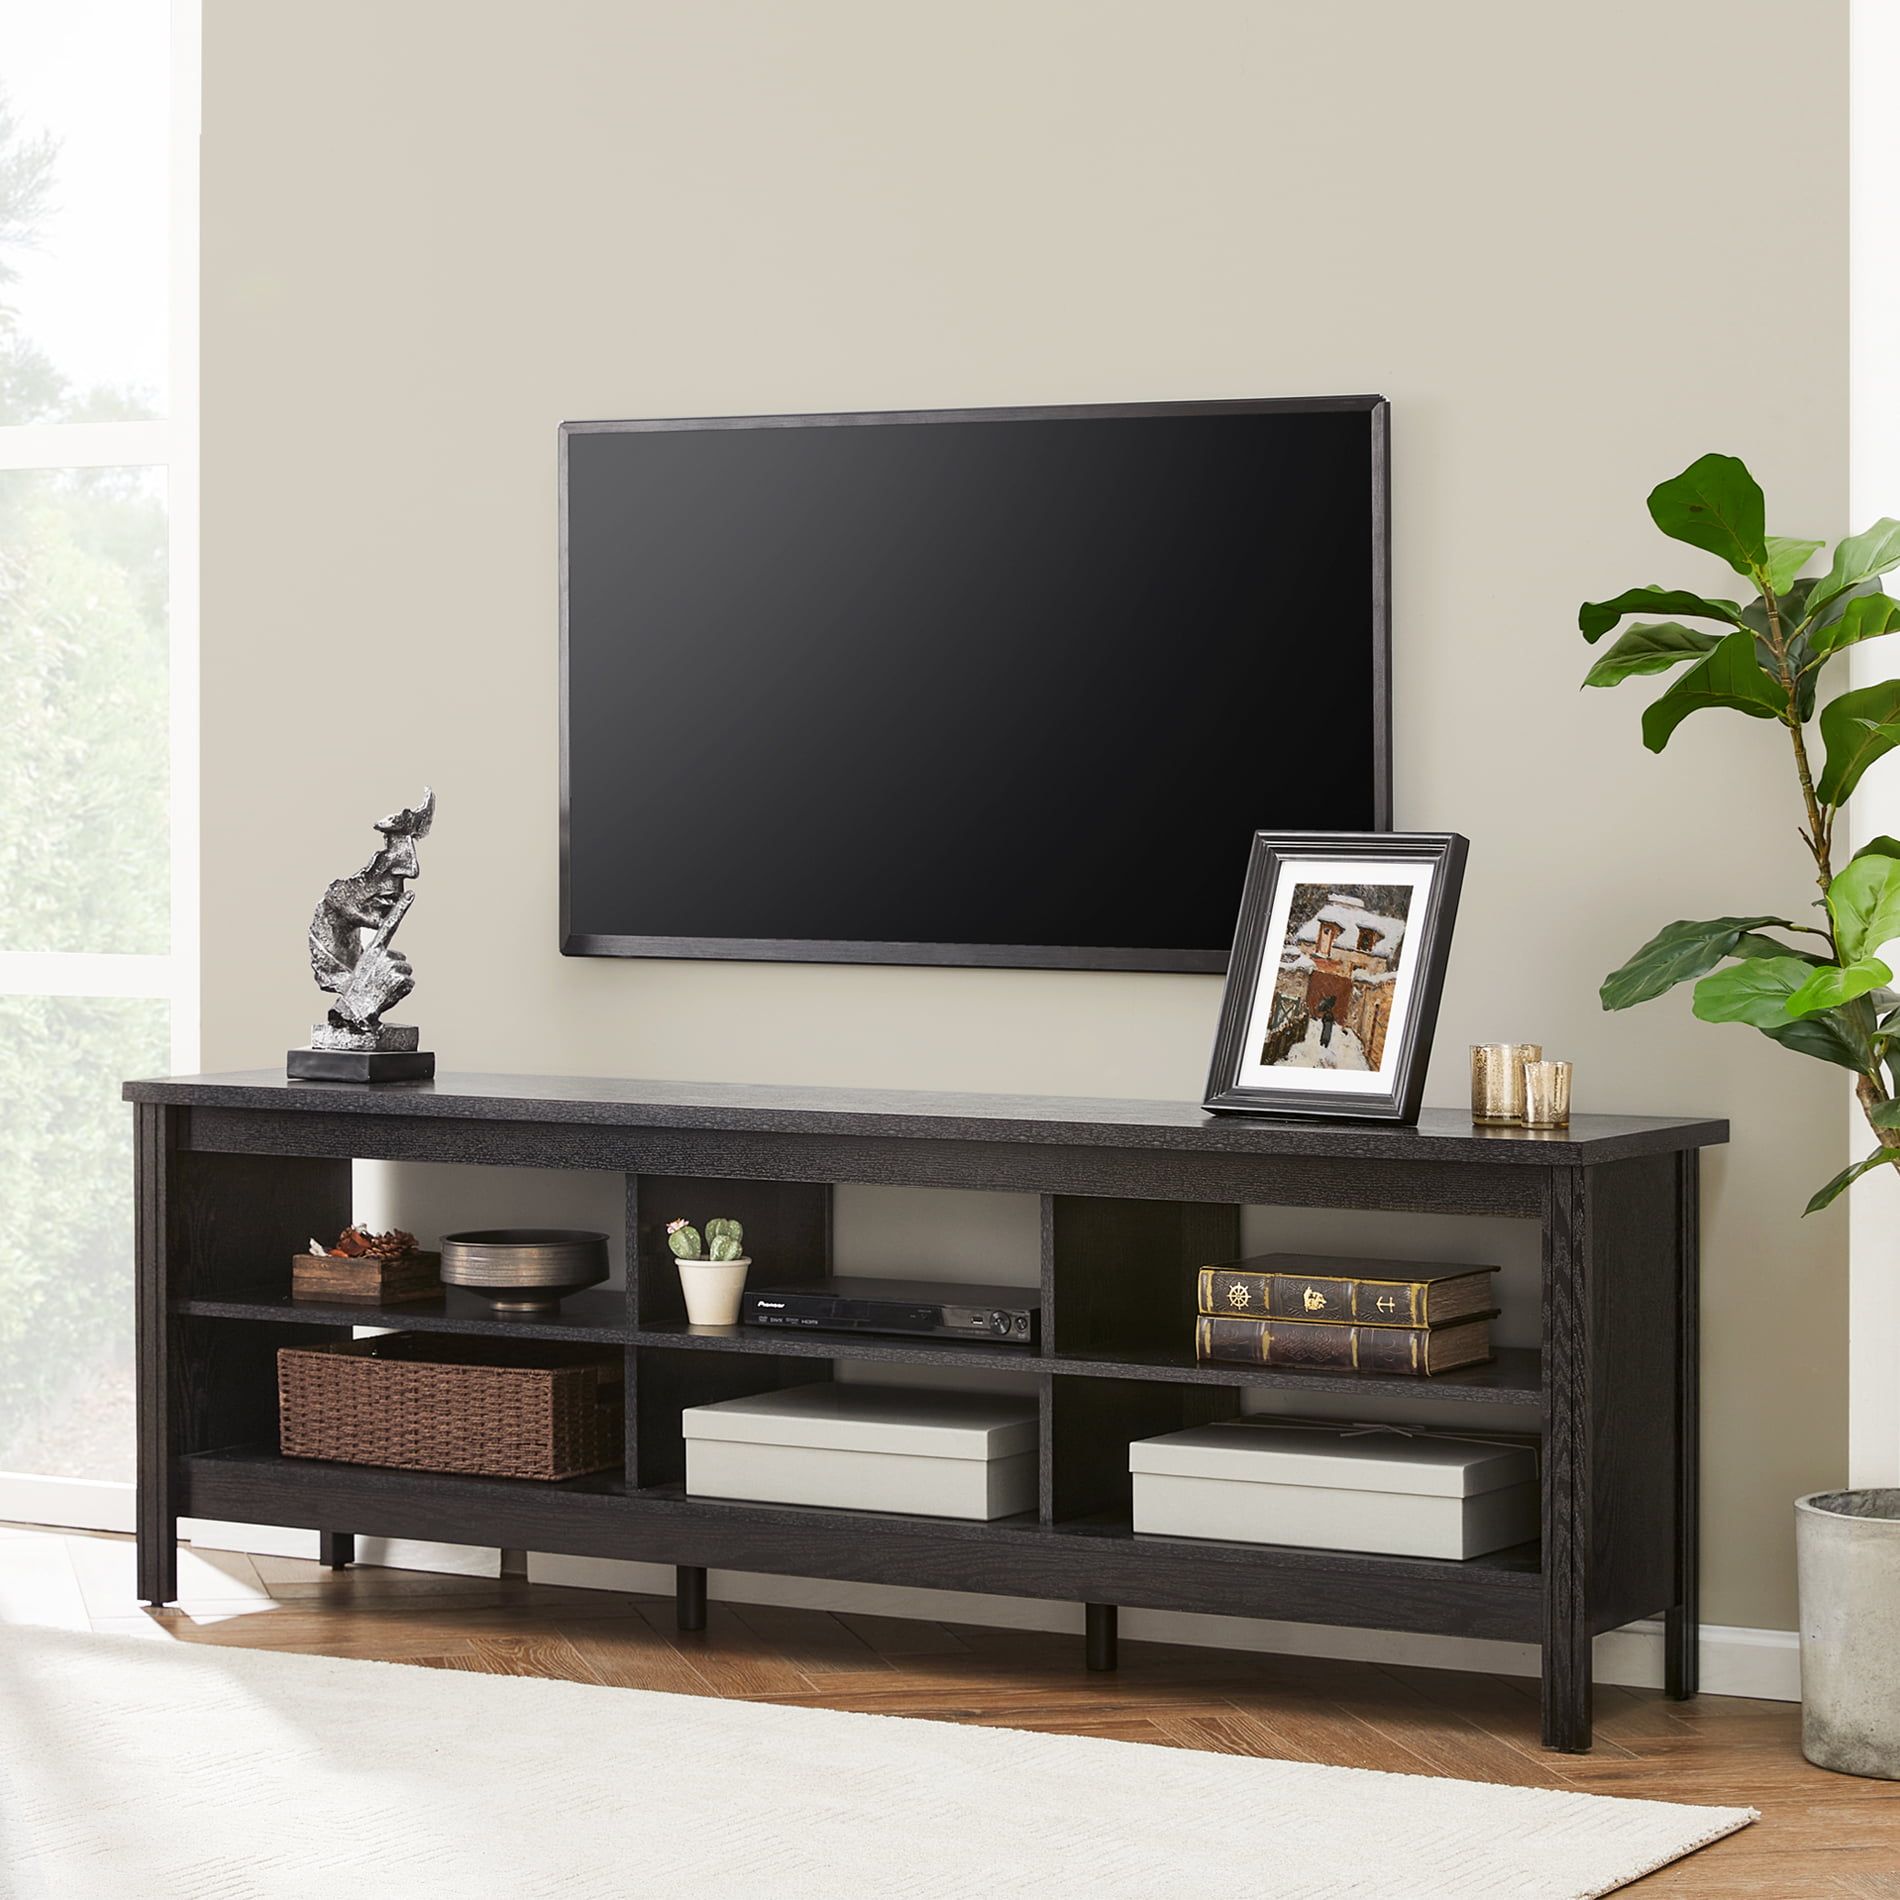 Farmhouse Tv Stands For 75 Inch Flat Screen Media Console Storage Throughout Entertainment Center With Storage Cabinet (View 13 of 20)